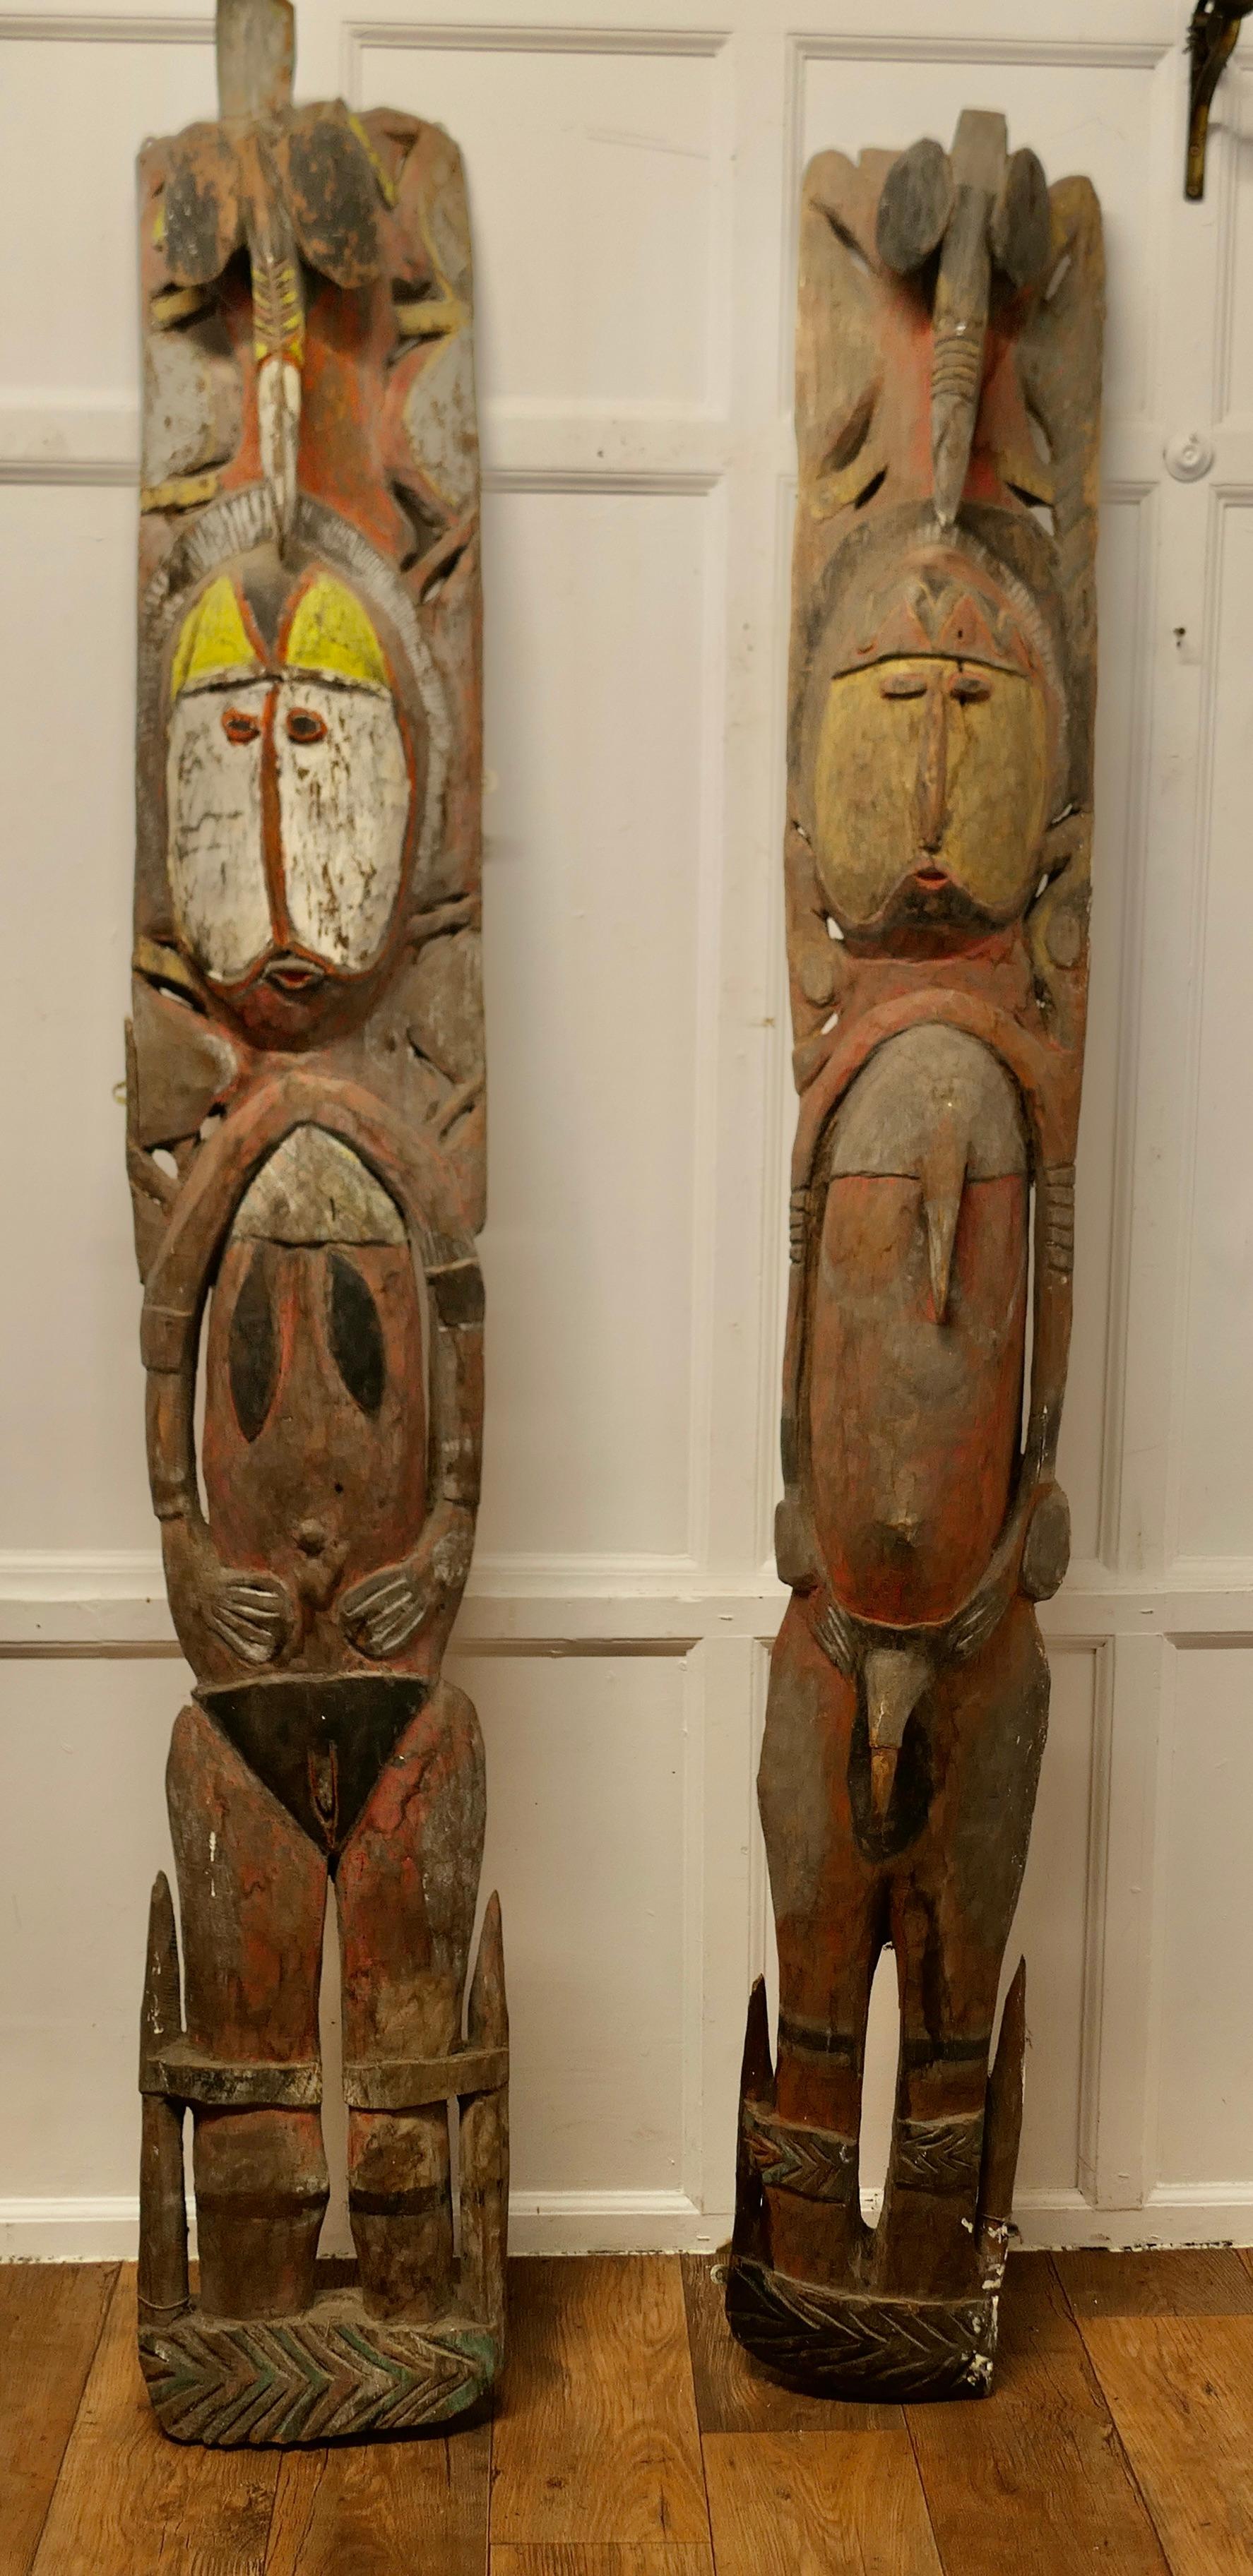 Very Tall Pair of African Marriage Figure Panels

This is a very heavy pair of large full-length figures, wall panels, they are African, carved and polychrome painted, modelled as a male and female
Both figures have a toucan at the top above